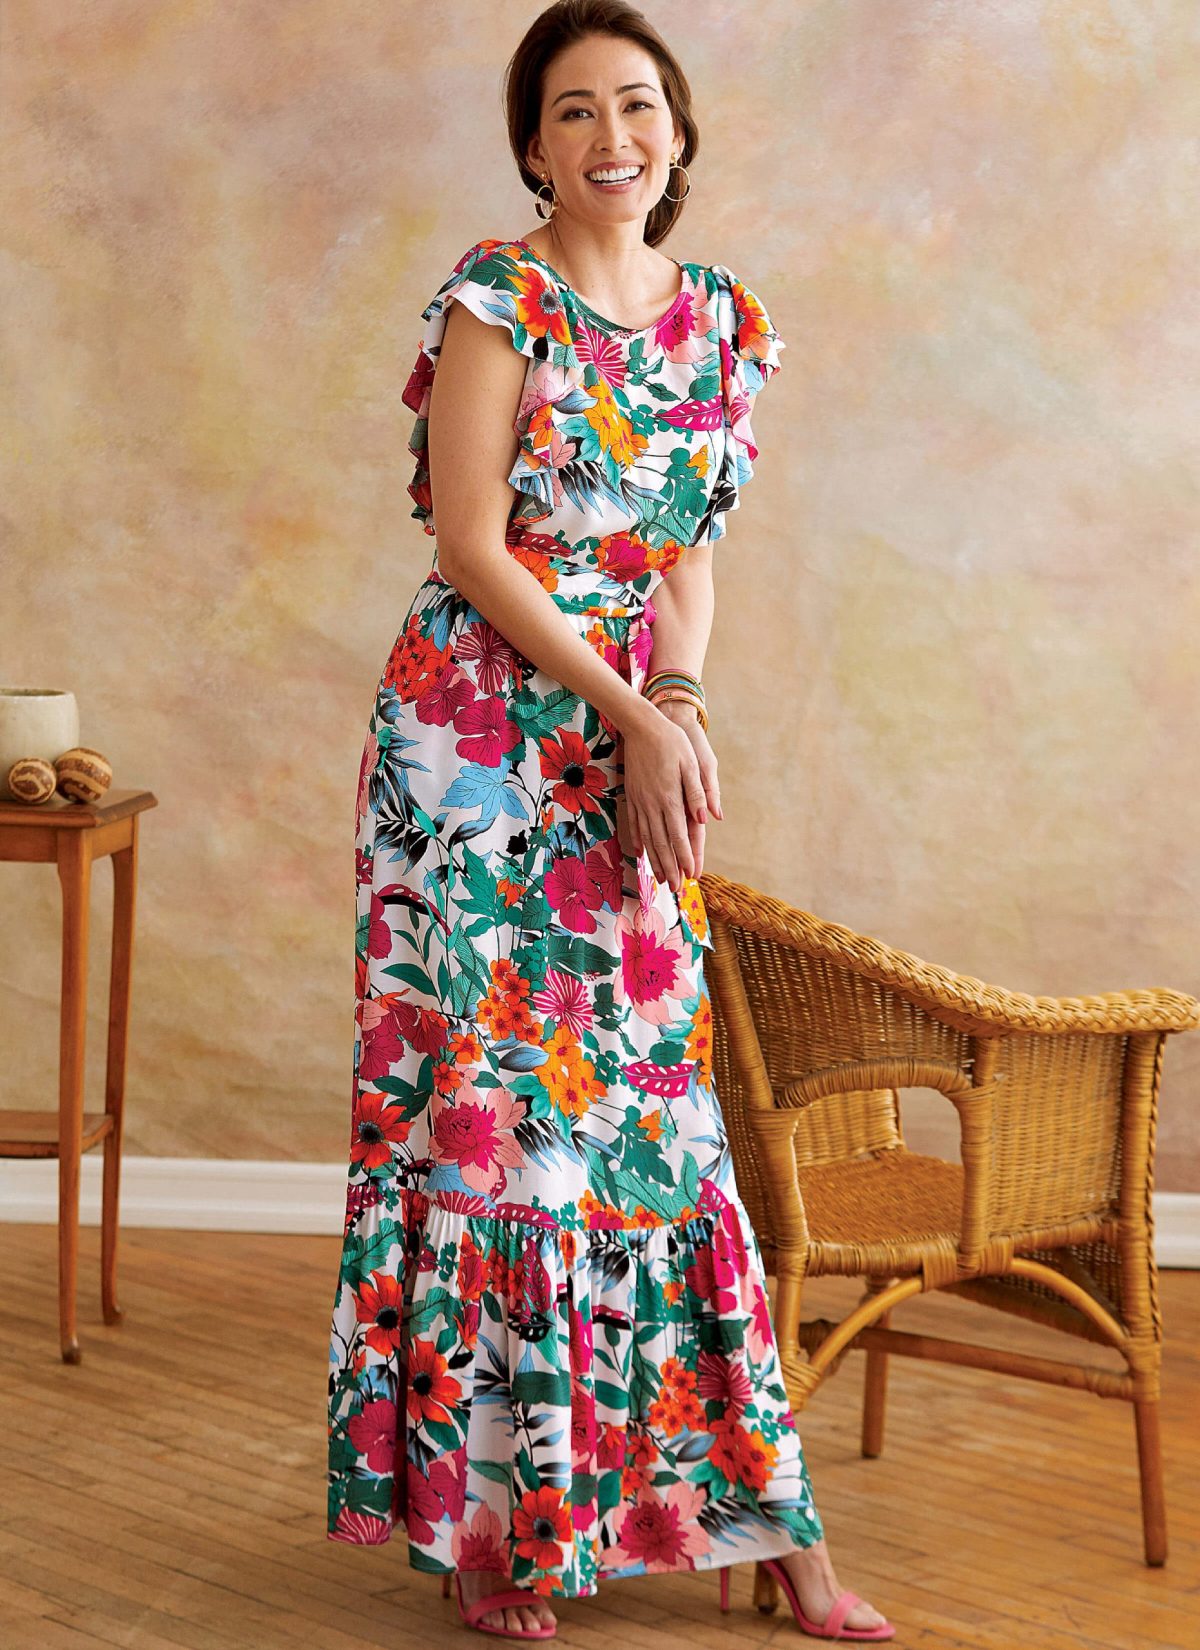 Butterick Sewing Pattern B6677 Misses' Dress and Sash